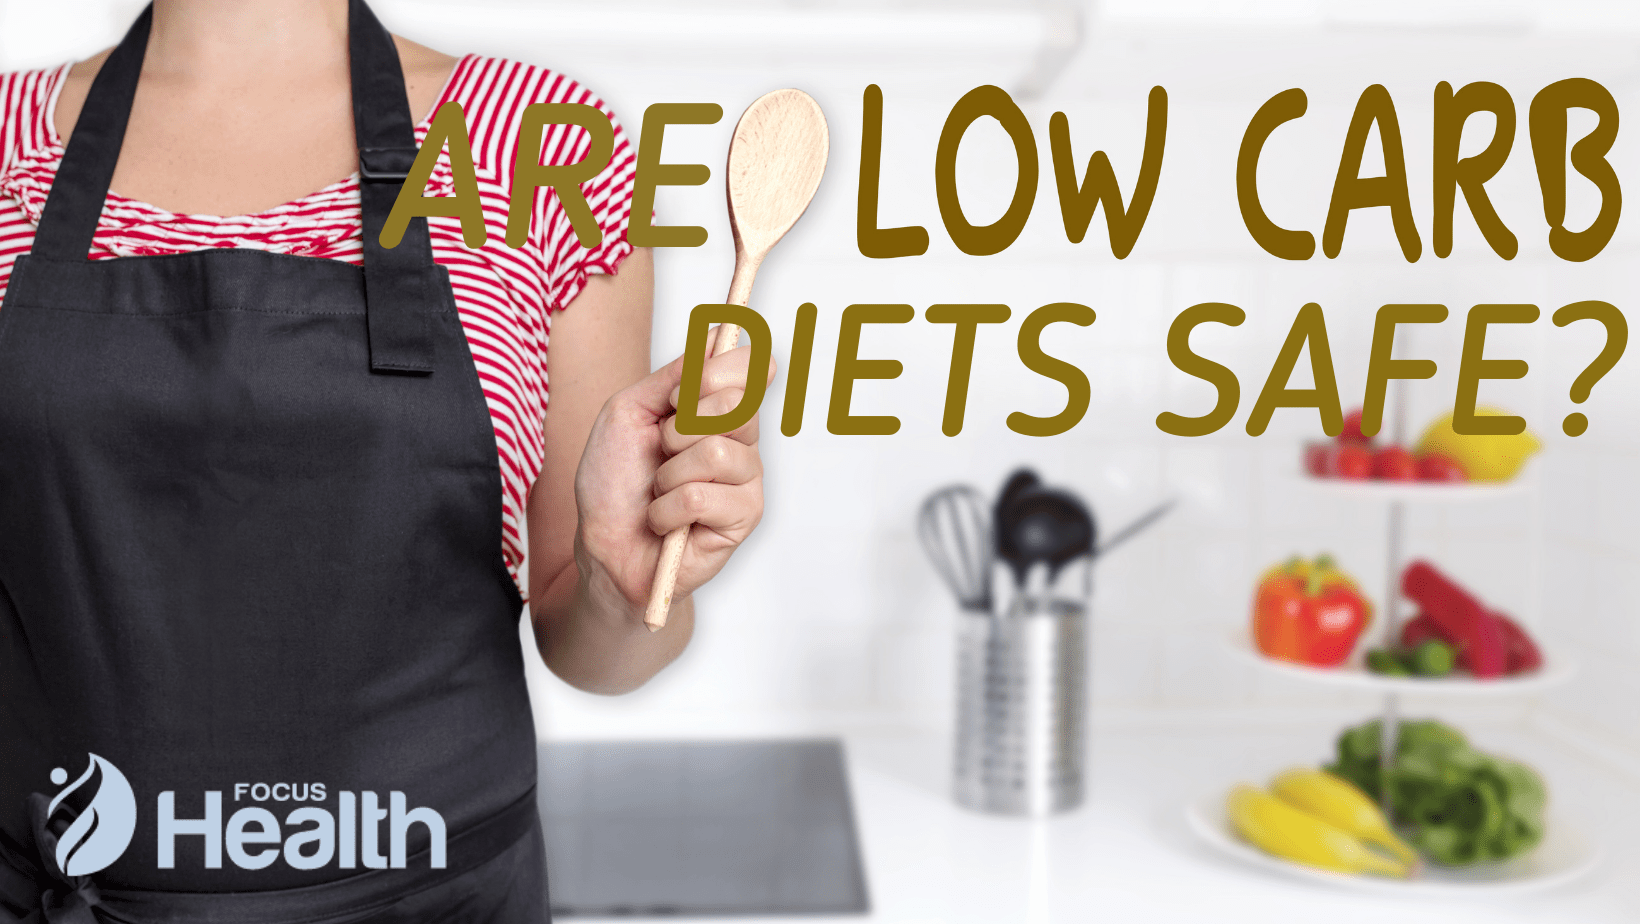 Are Low Carb Diets Safe